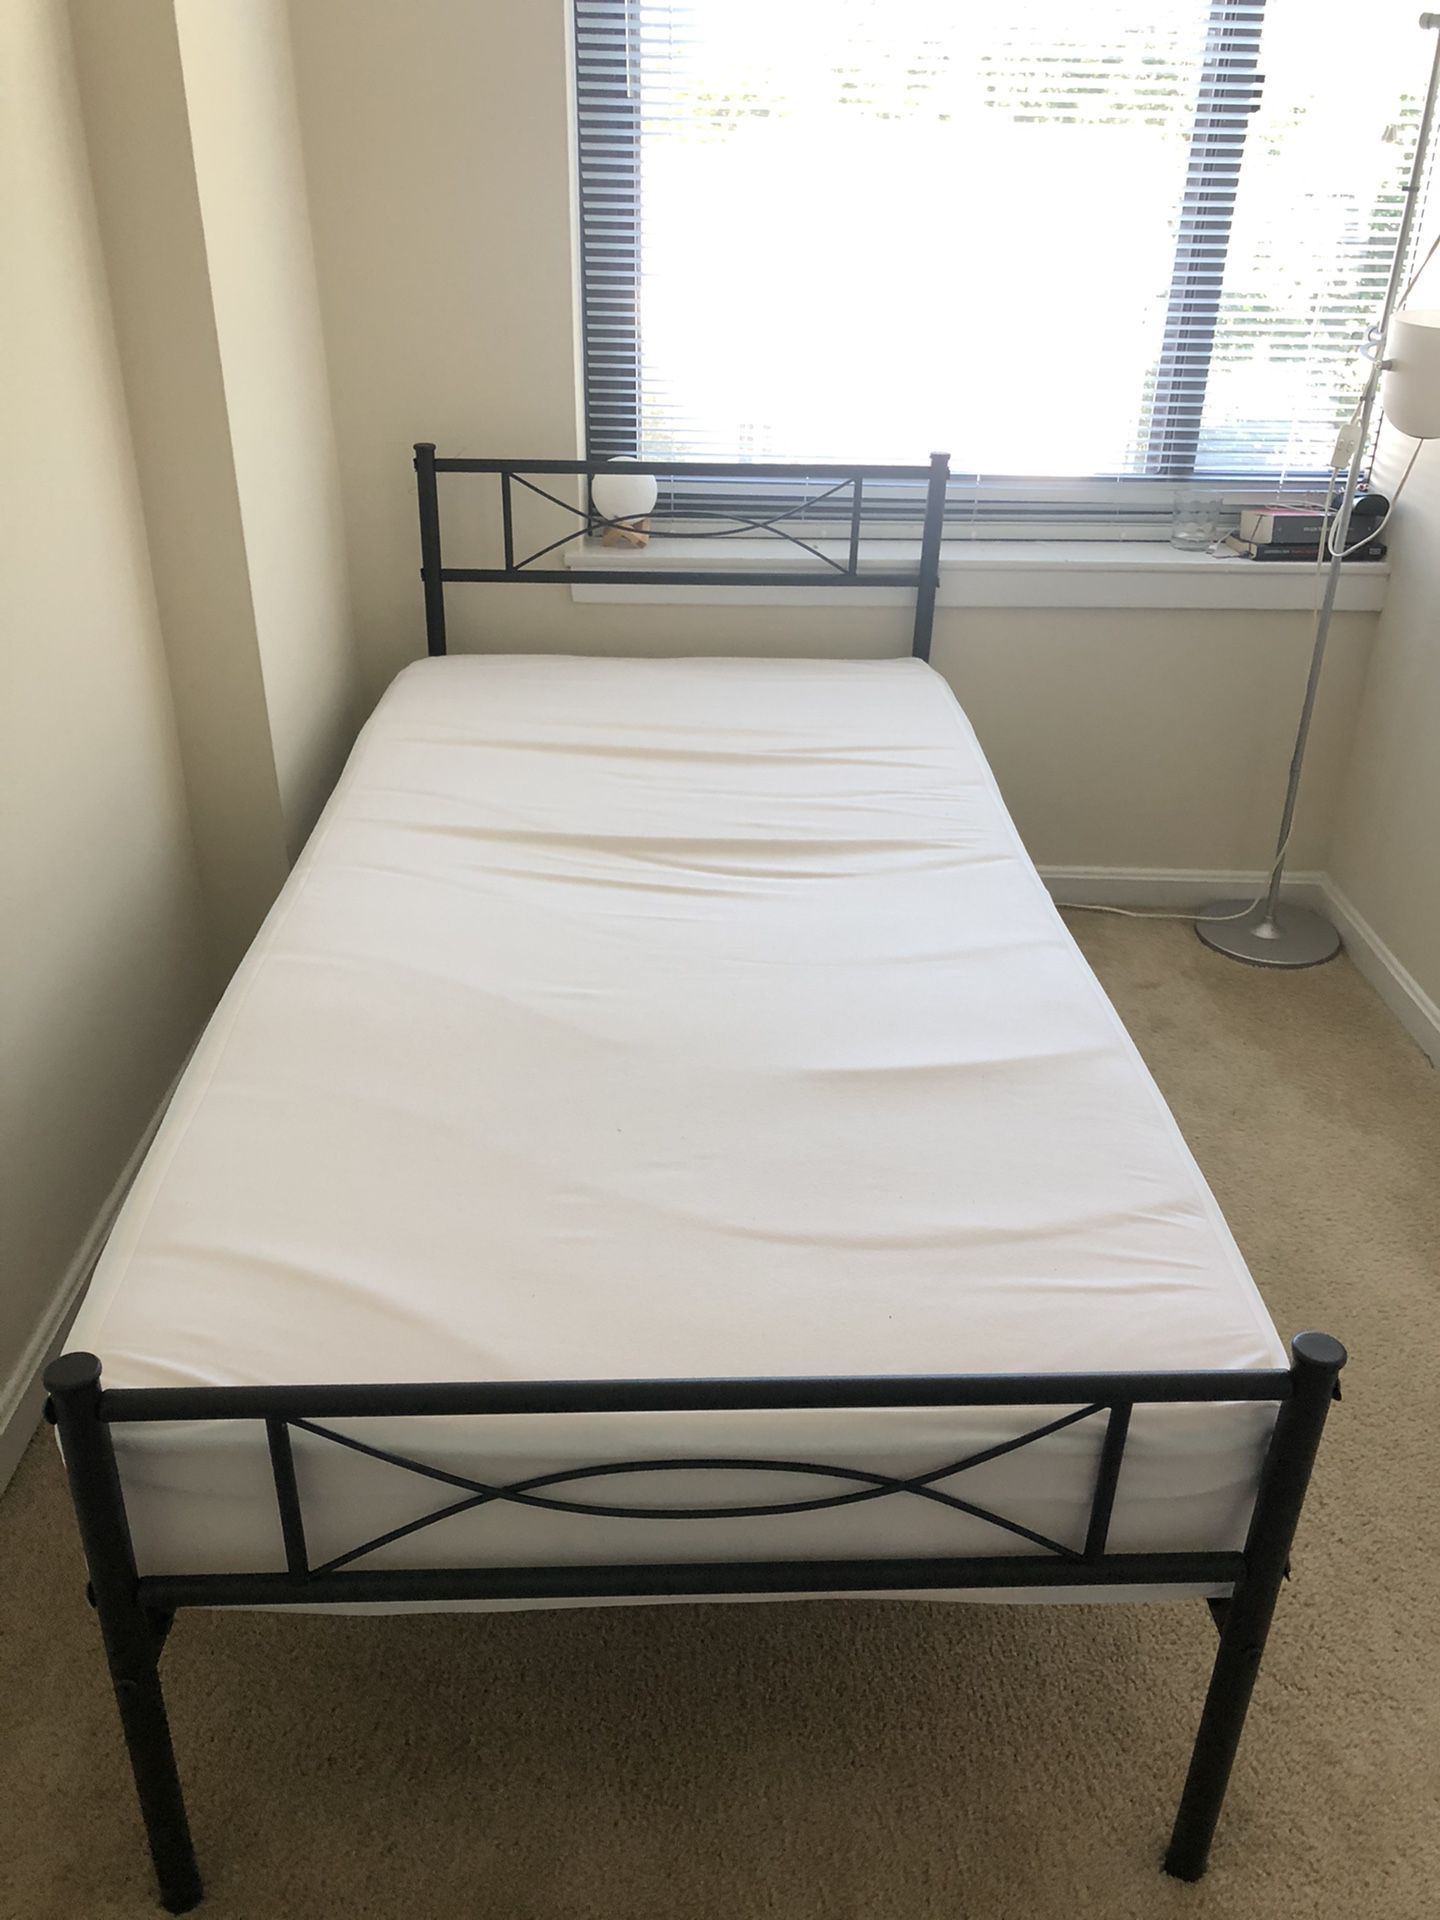 Used (very good condition) matress and bed frame